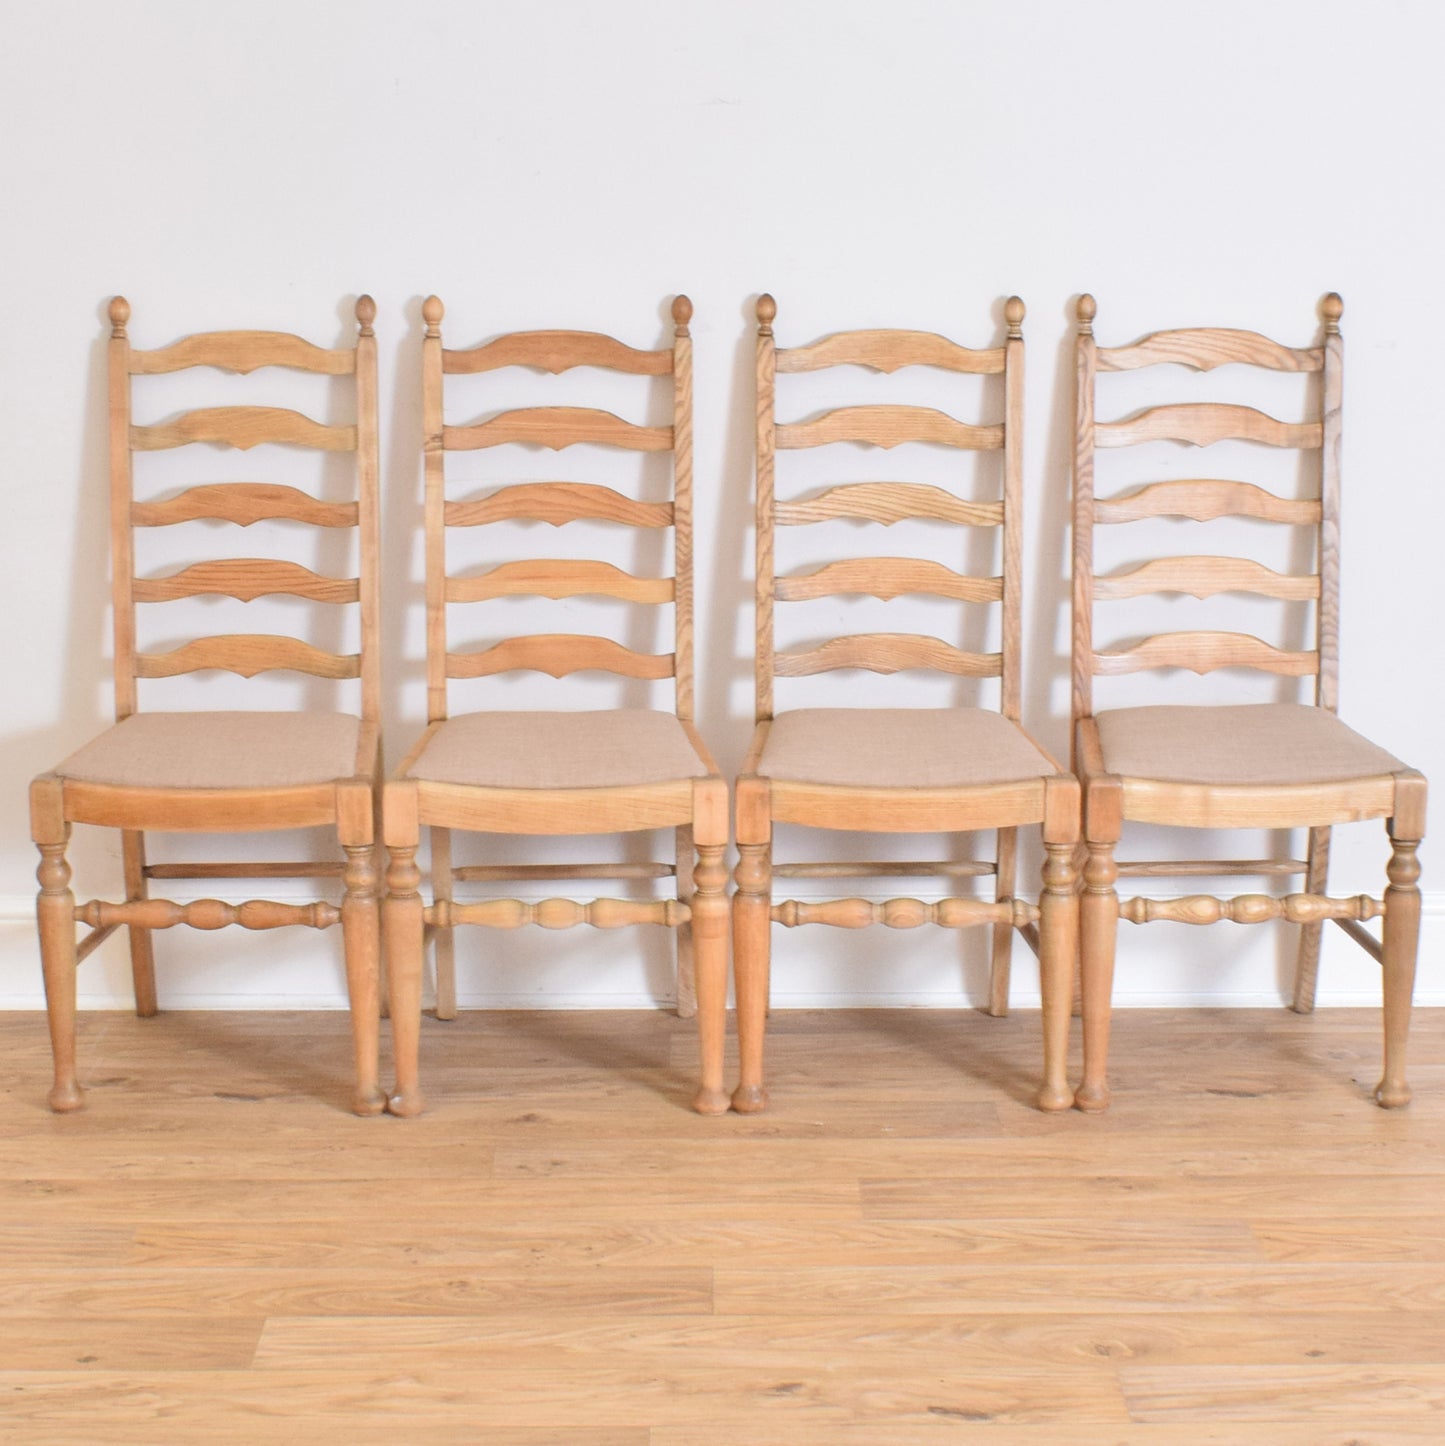 Oak Table and Four Chairs